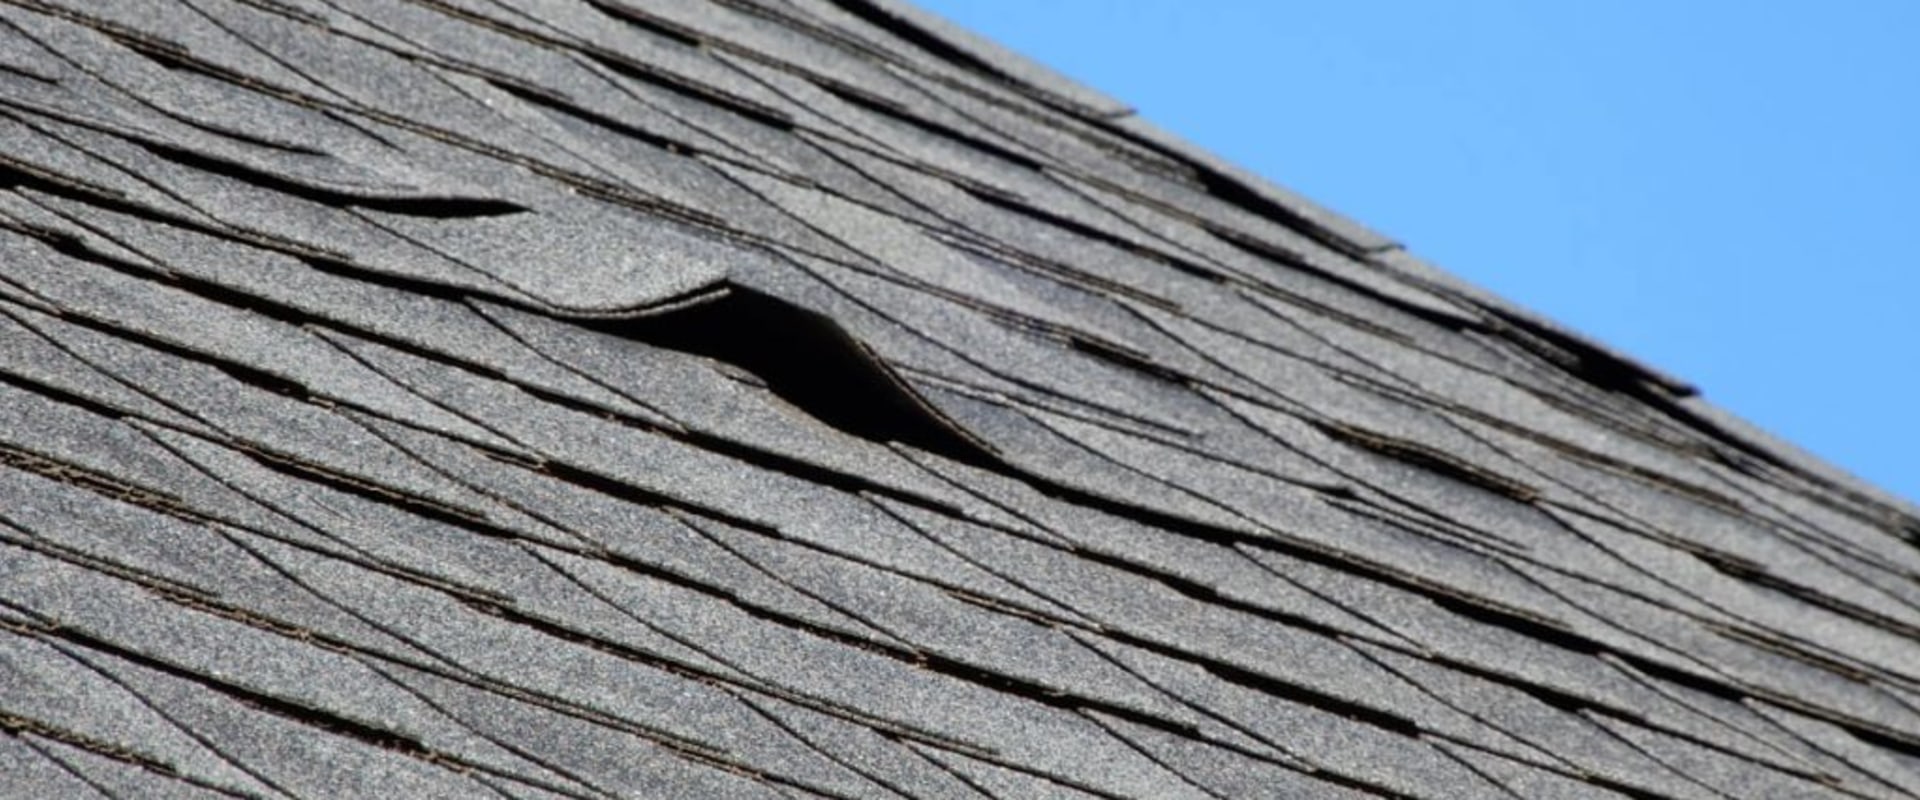 How often should roof be replaced?